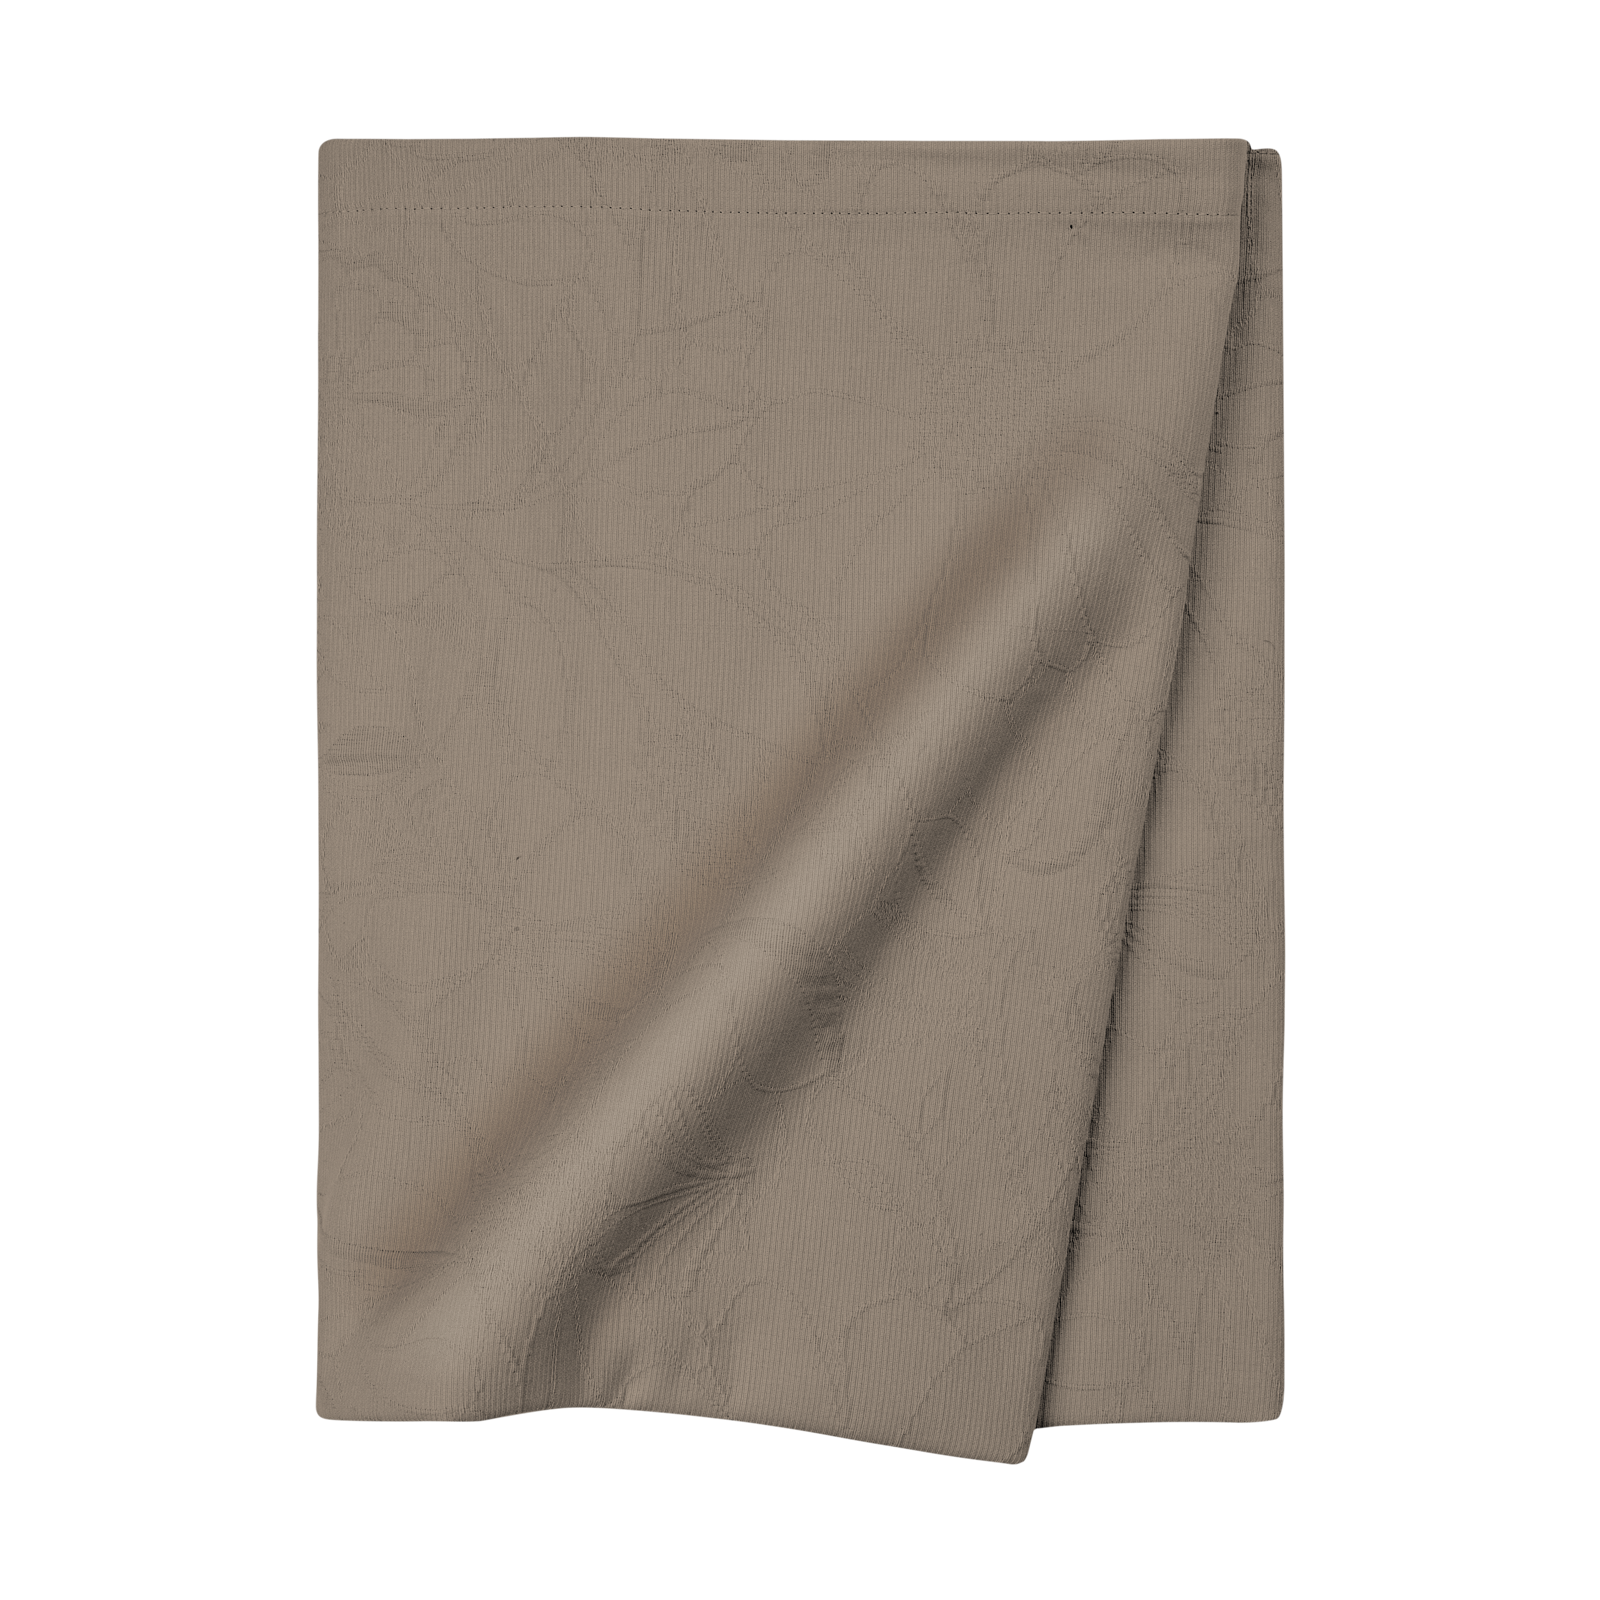 Größe: 100x 100 cm Farbe: taupe #farbe_taupe